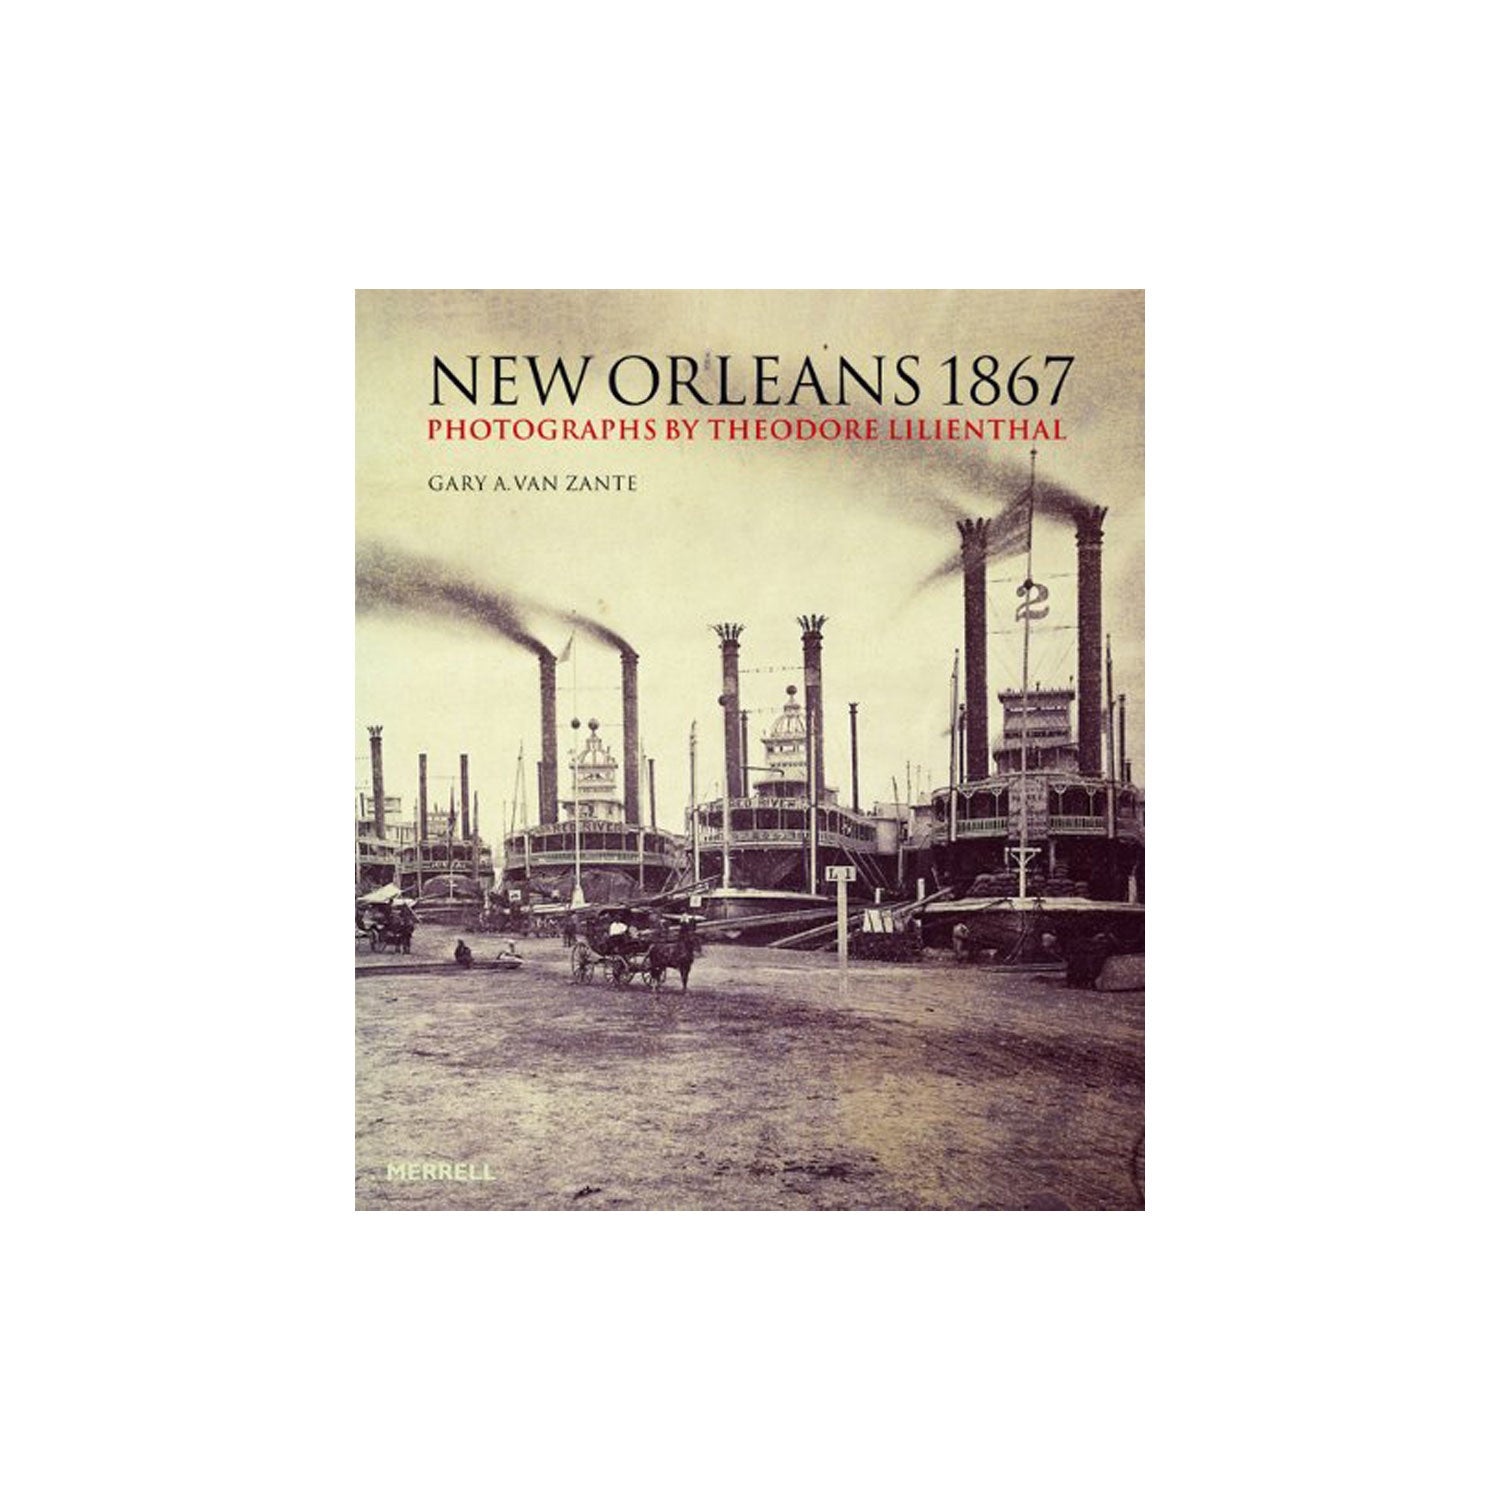 New Orleans 1867 by Gary A van Zante Photo Museum Ireland